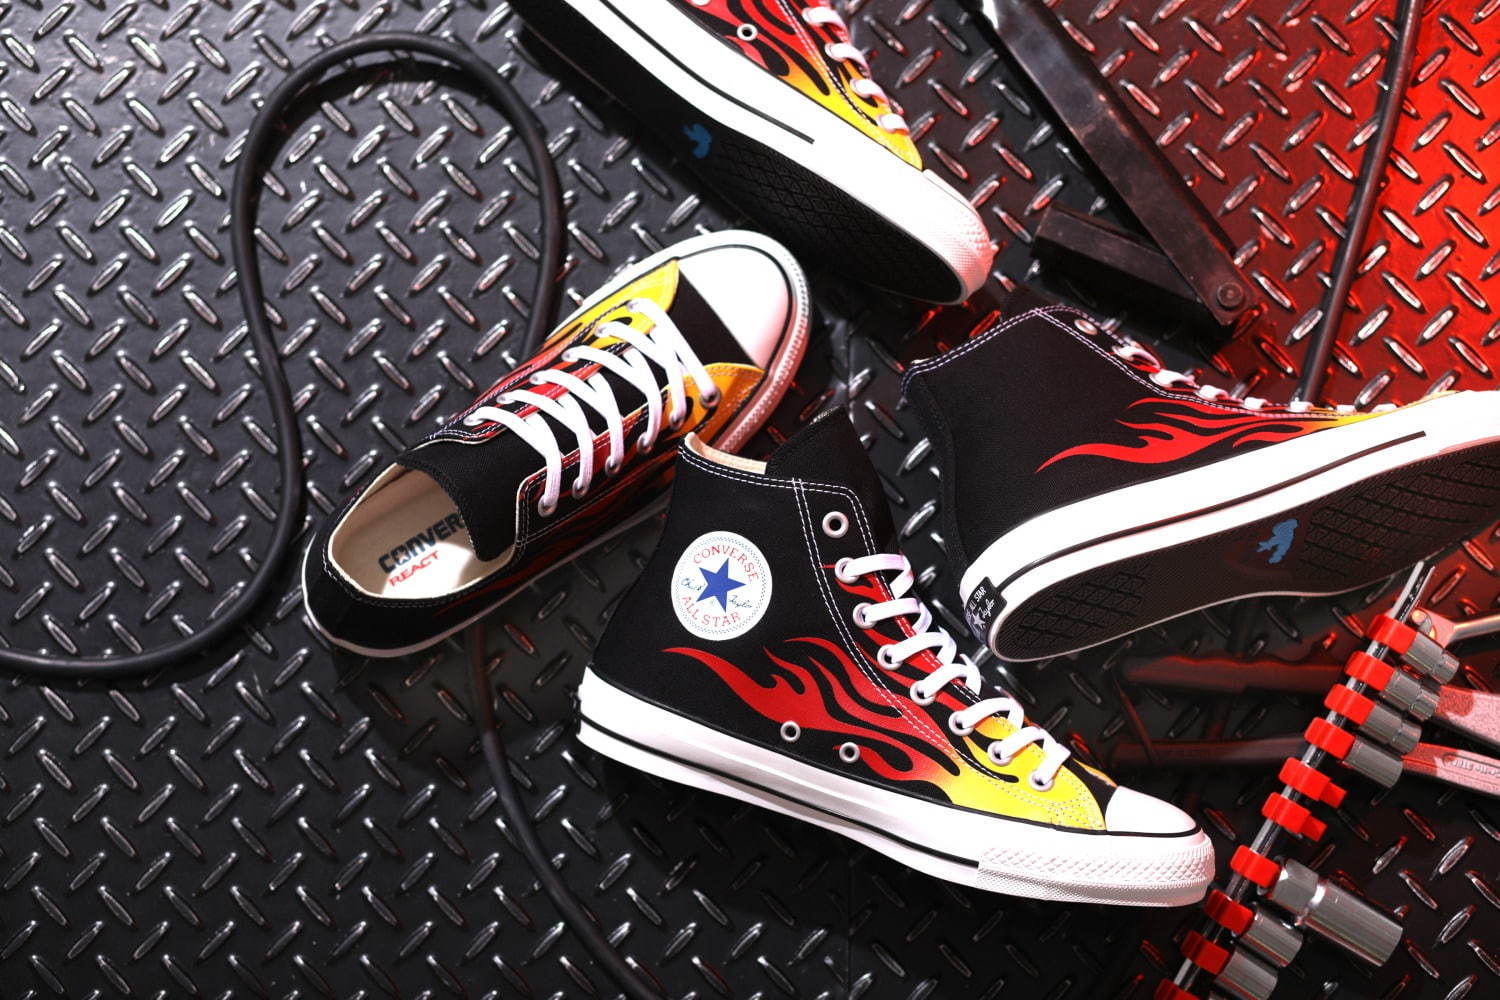 Converse ファイヤーパターンのall Star 100 Ignt Ox Hiが7月23日に復刻発売予定 Up To Date